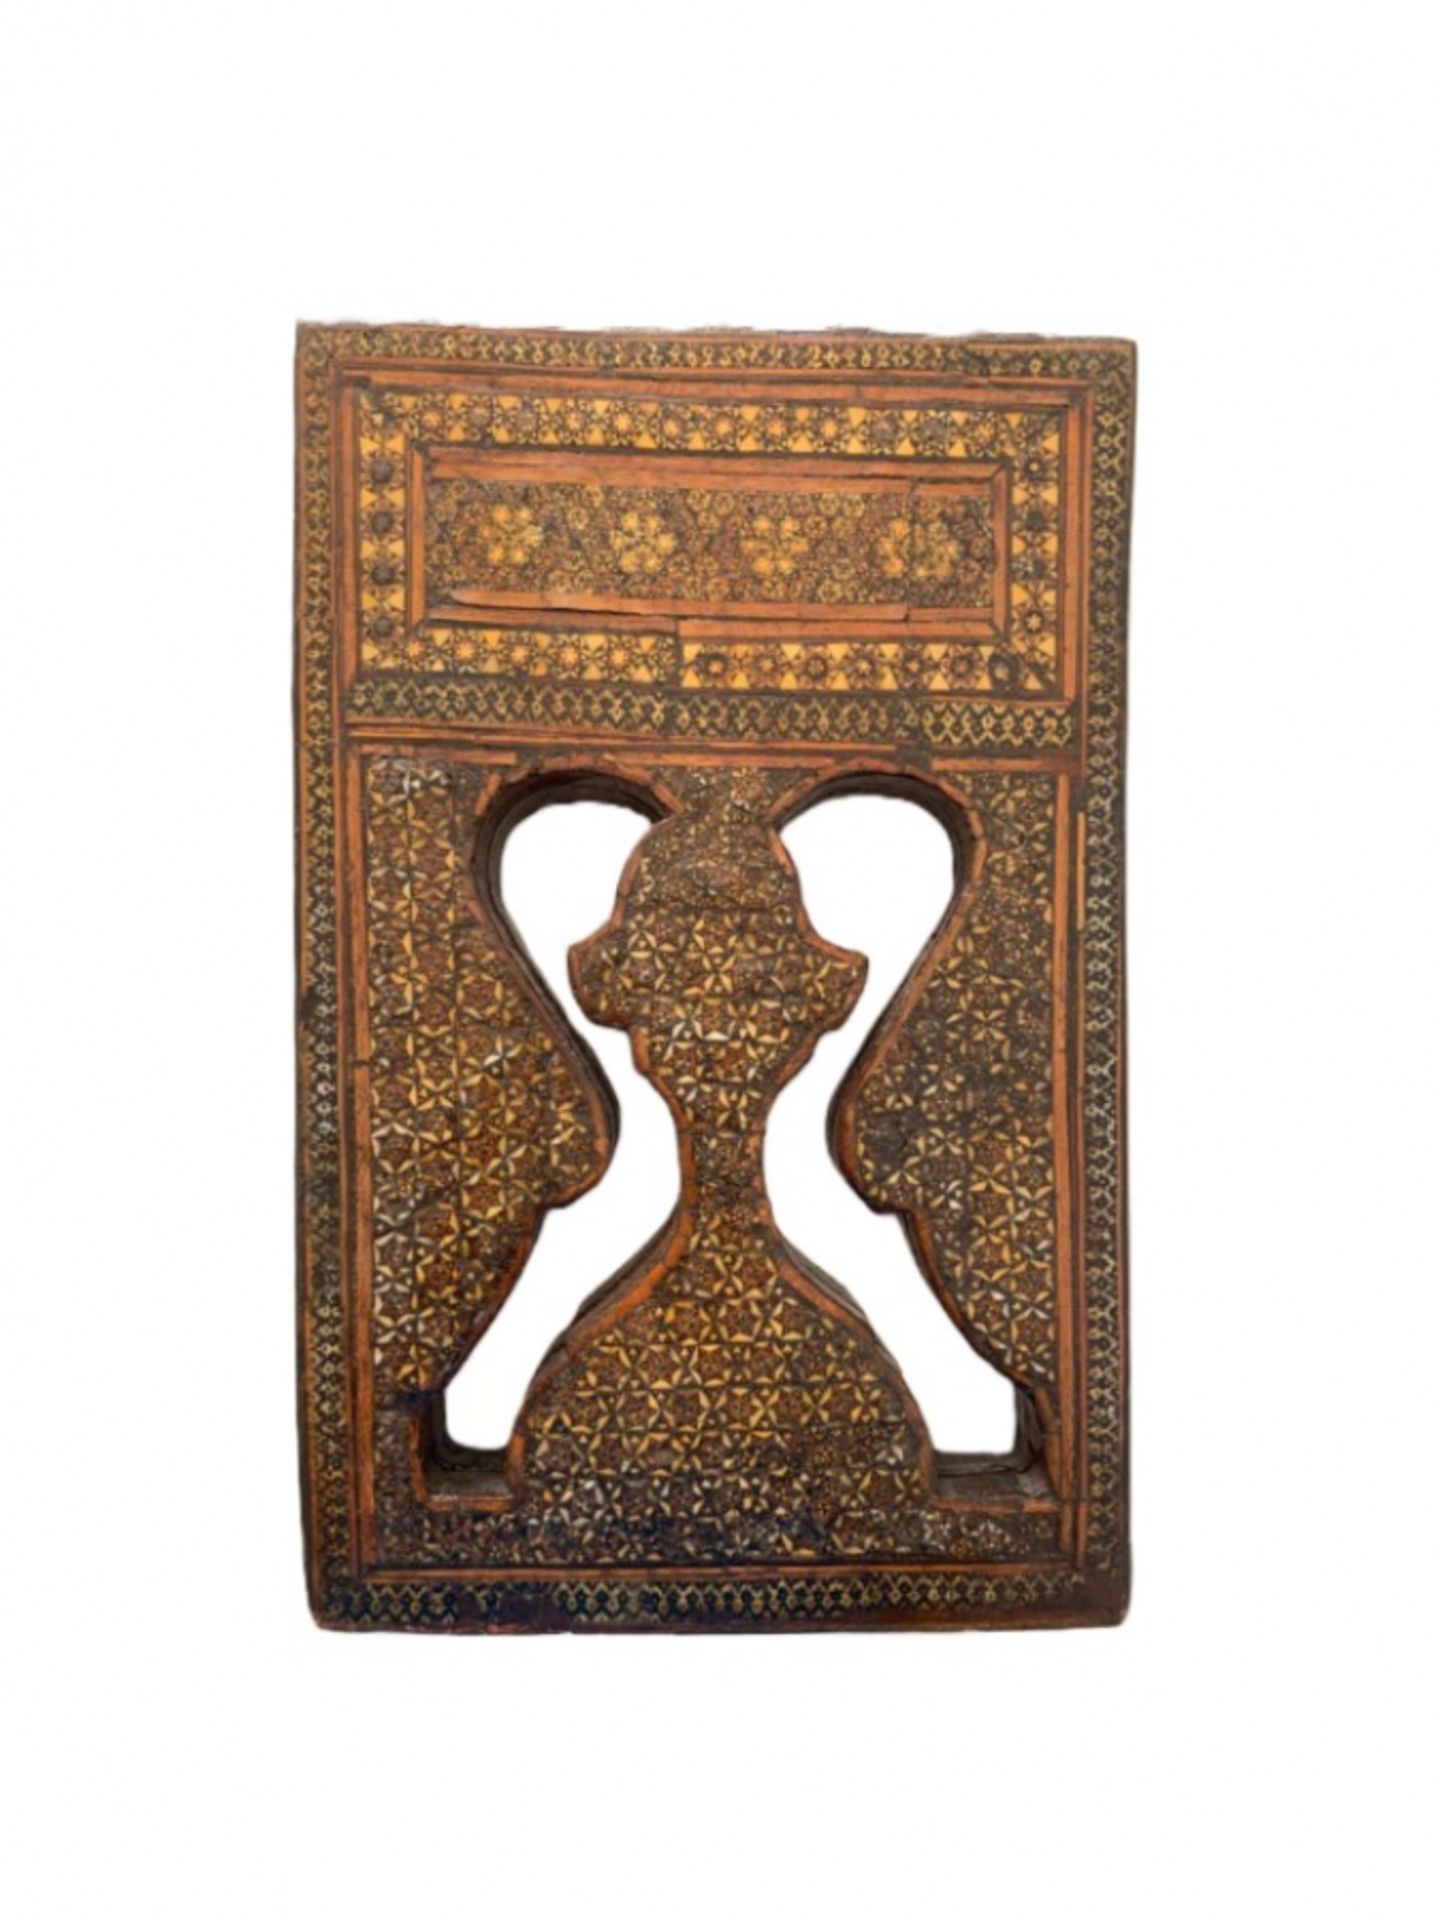 Beautifully decorated Ottoman Quran holder - Image 4 of 6